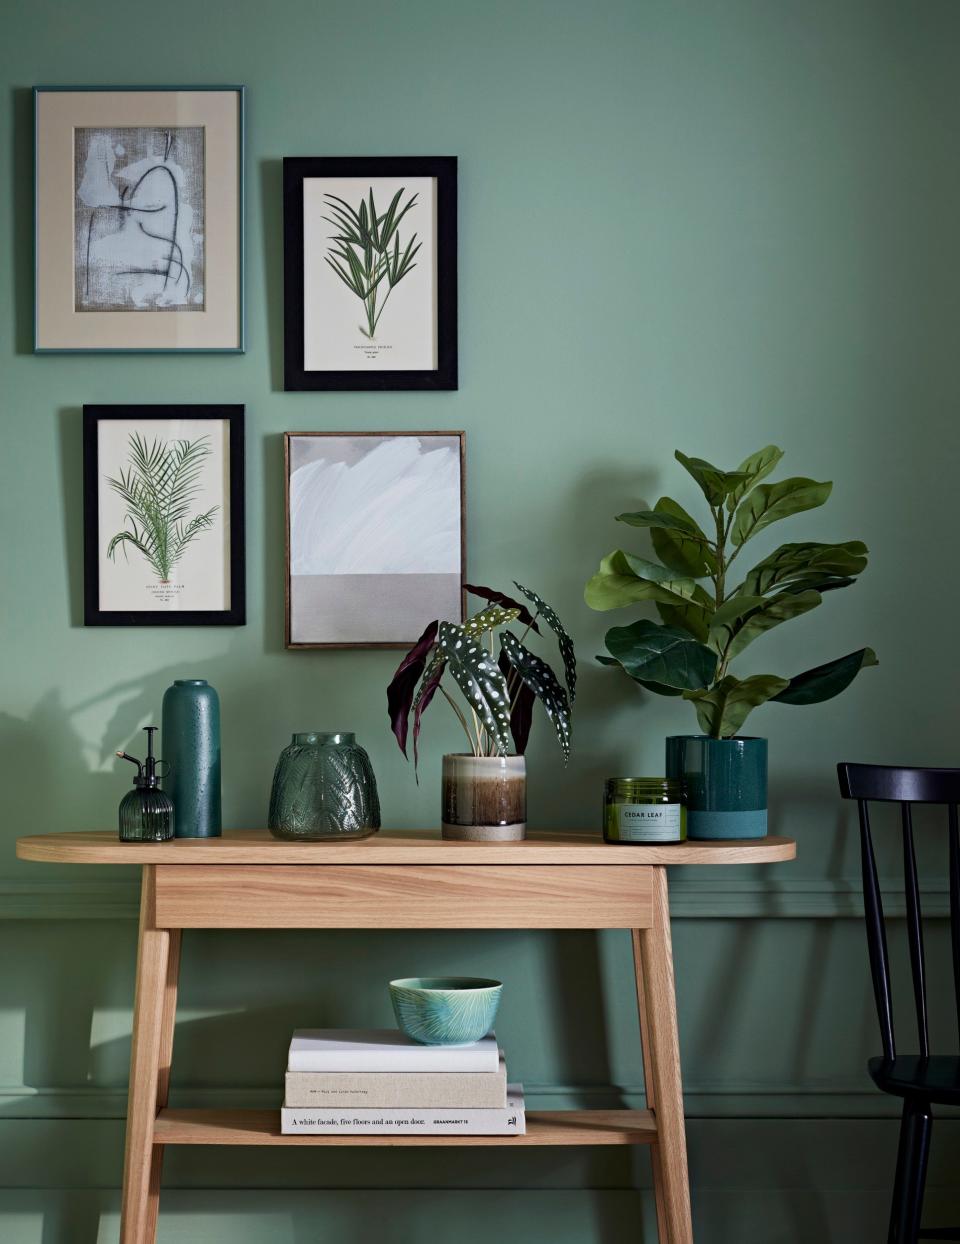 Calming colours and prints of plants - Jon Day Photography